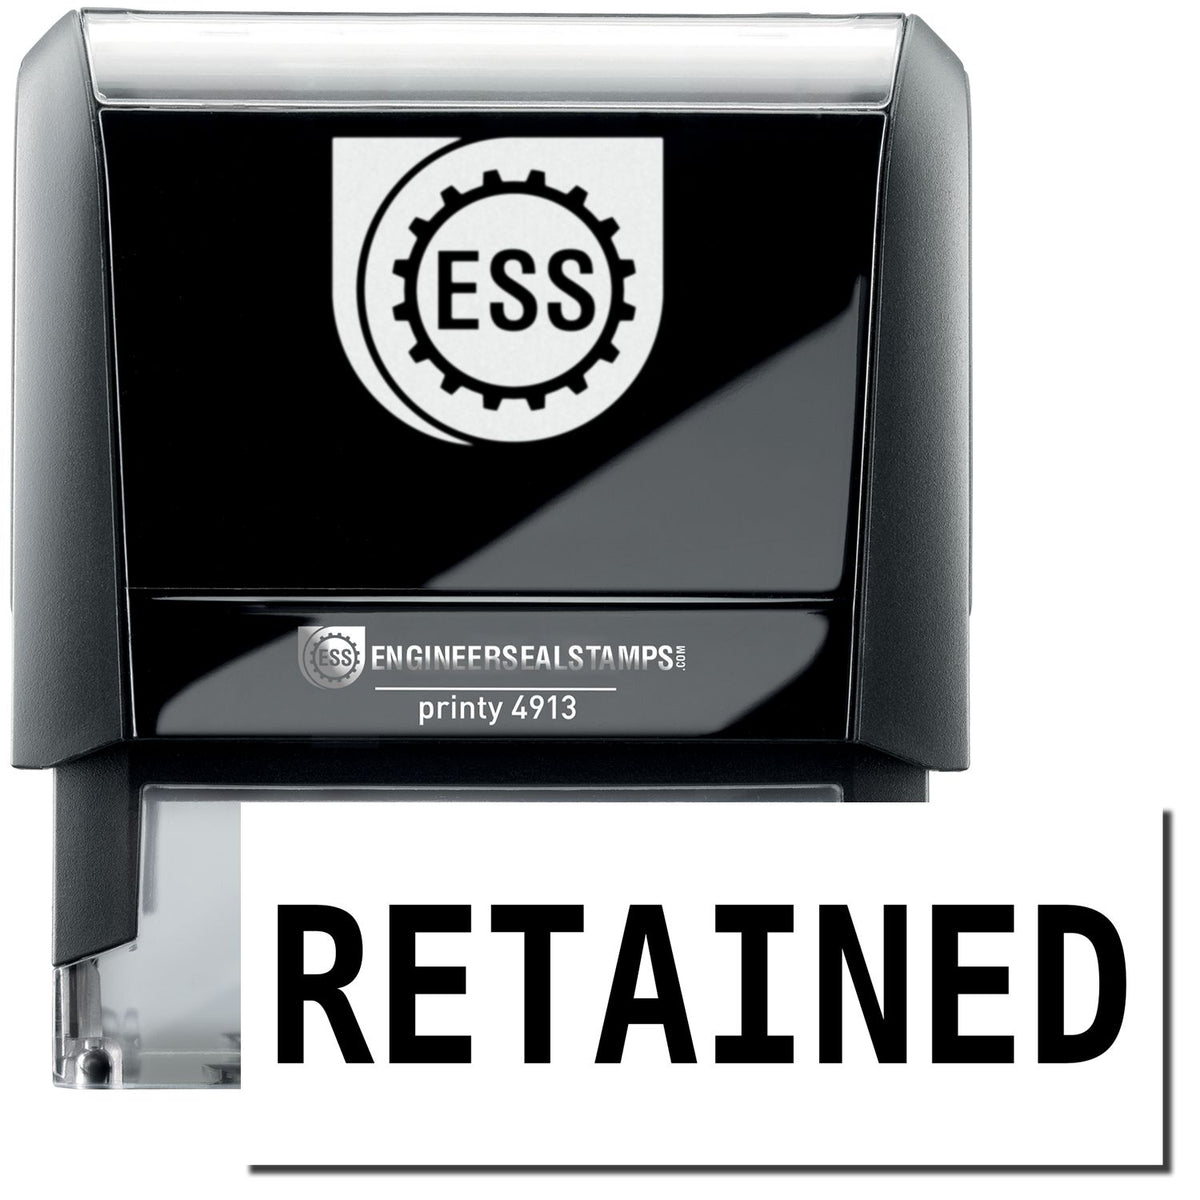 A self-inking stamp with a stamped image showing how the text &quot;RETAINED&quot; in a large bold font is displayed by it.